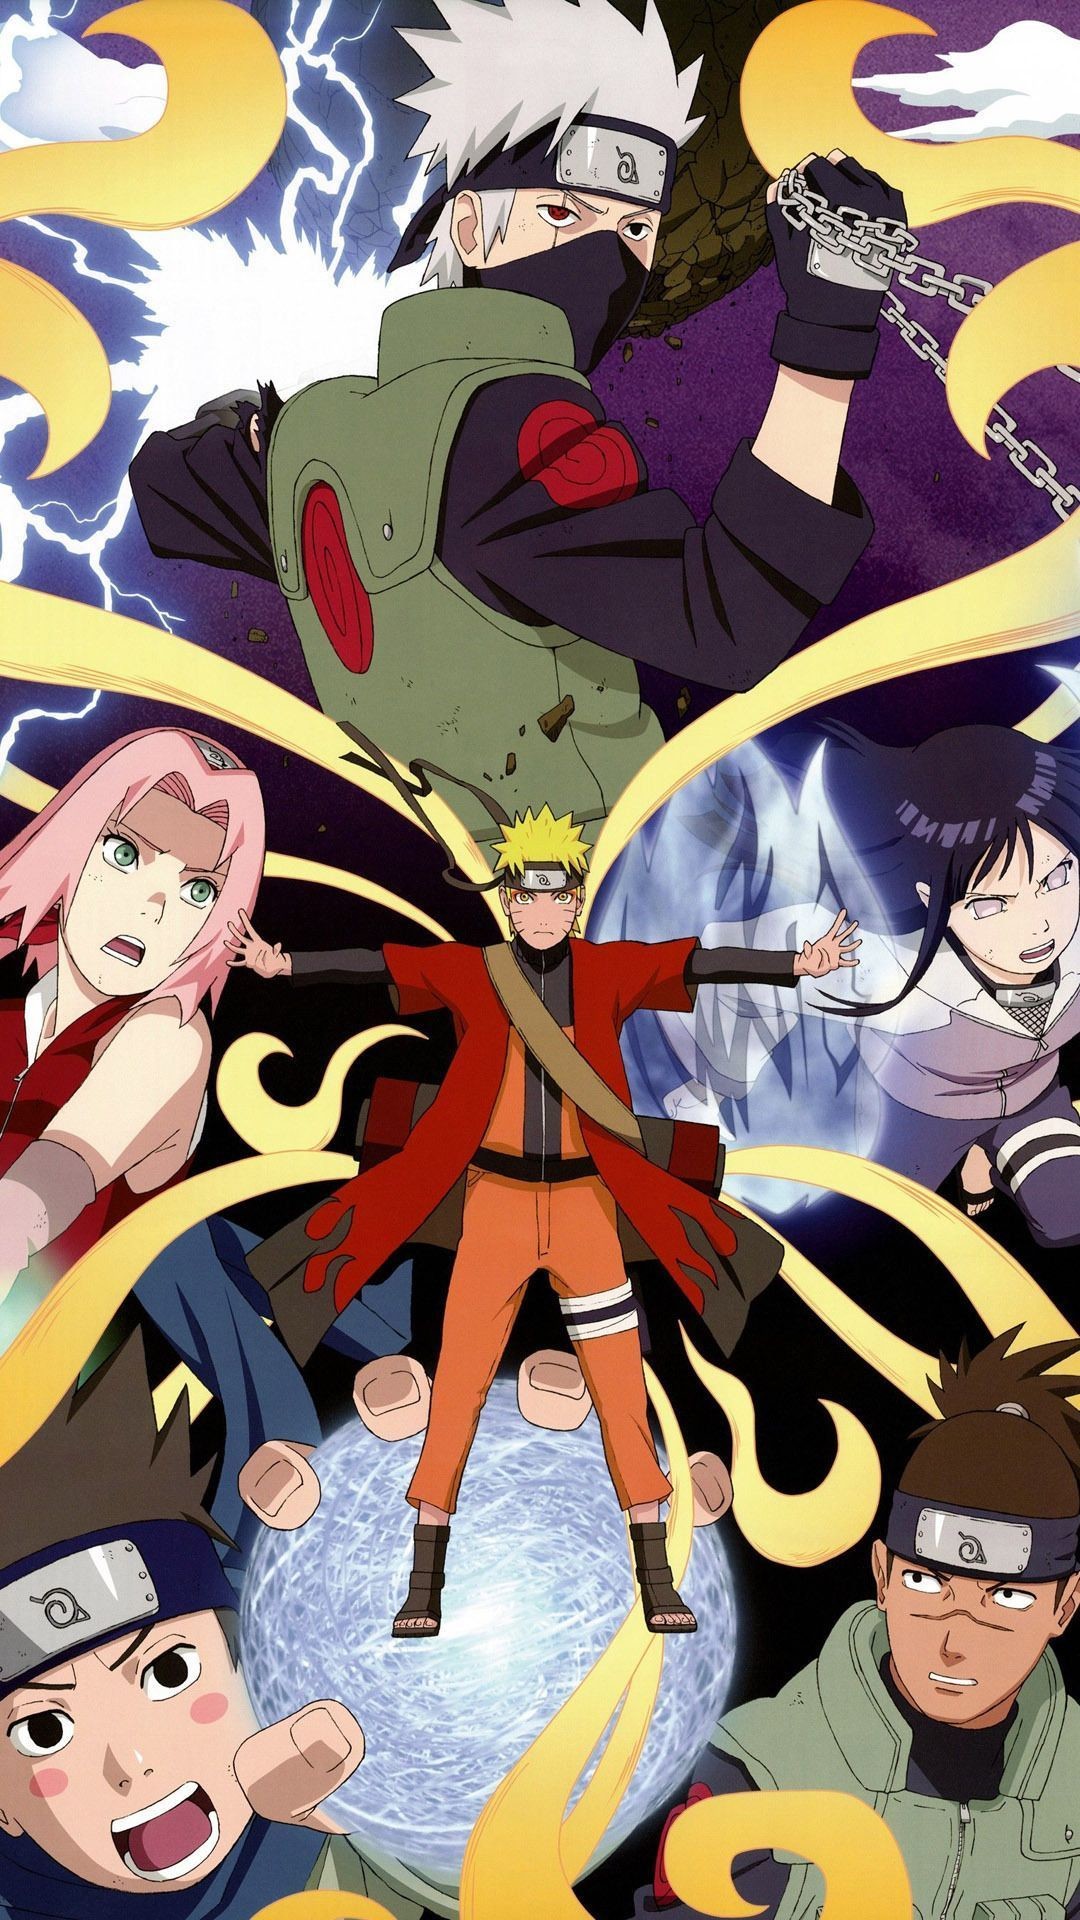 1080x1920 Download Naruto Iphone Background Free.